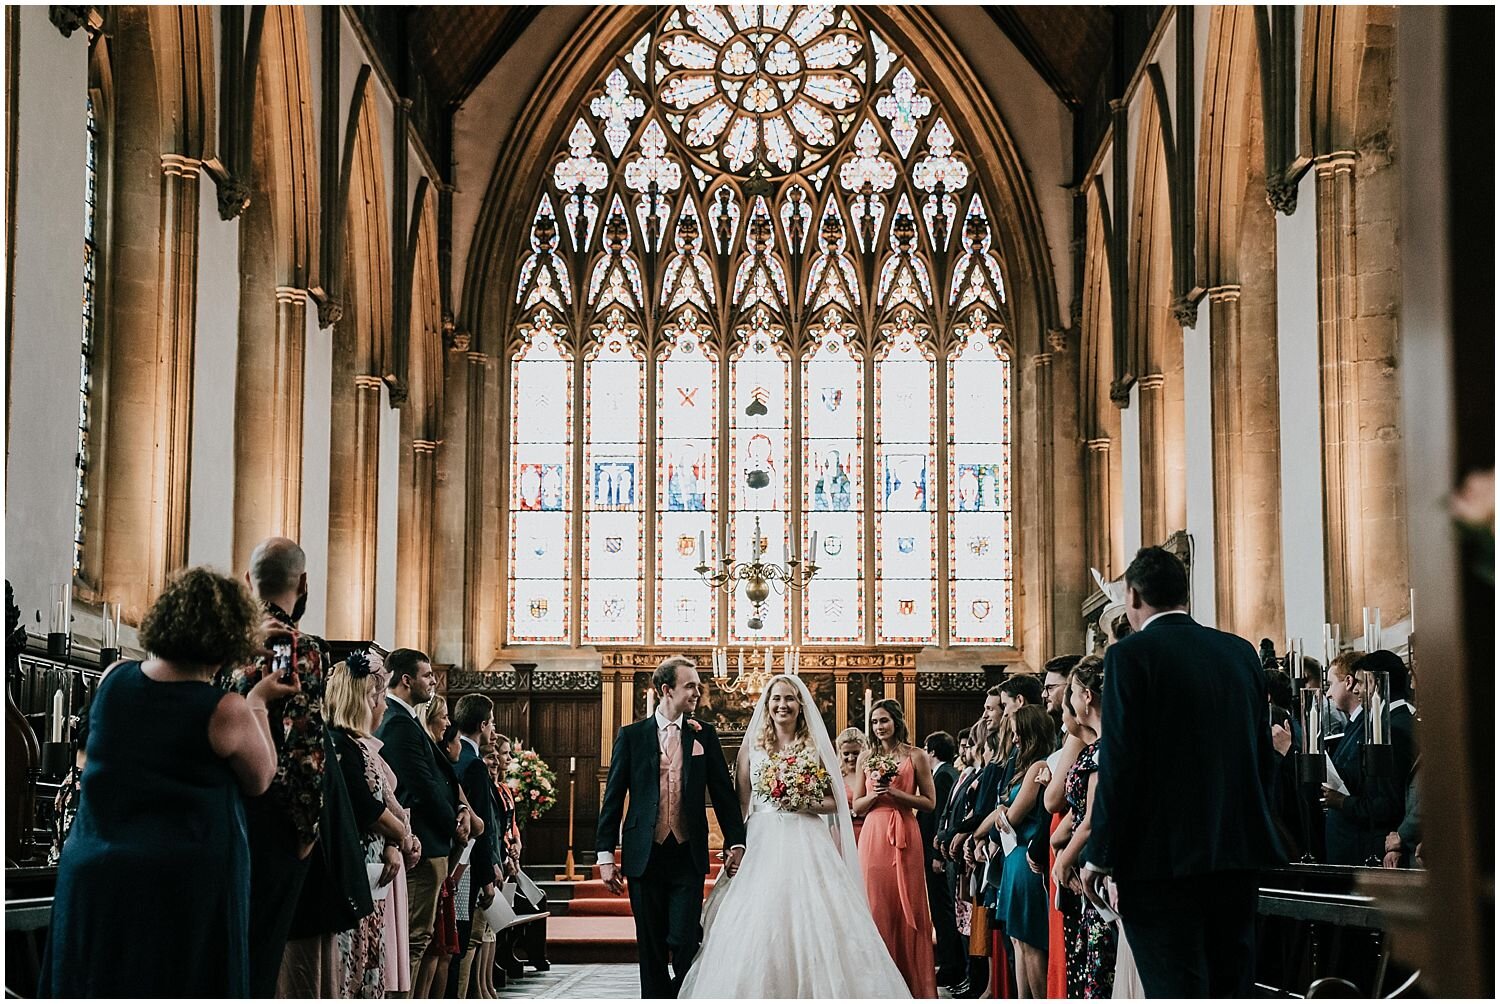 Bride and groom at Merton College Chapel in Oxford